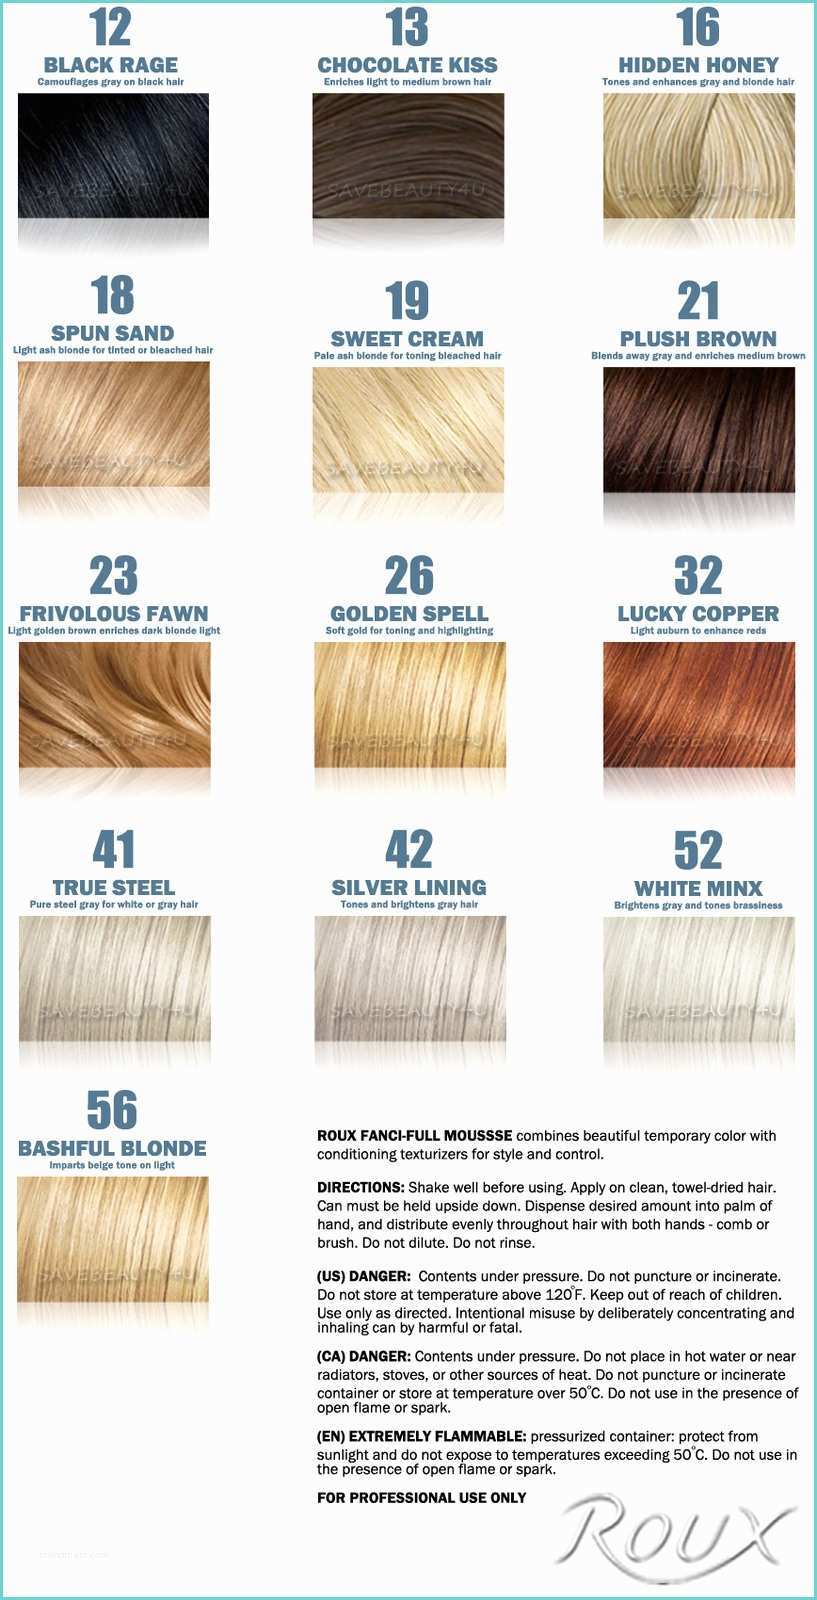 Complete HTML True Color Chart Roux Fanci Full Temporary Hair Color Rinse 13 Choc Kiss 15